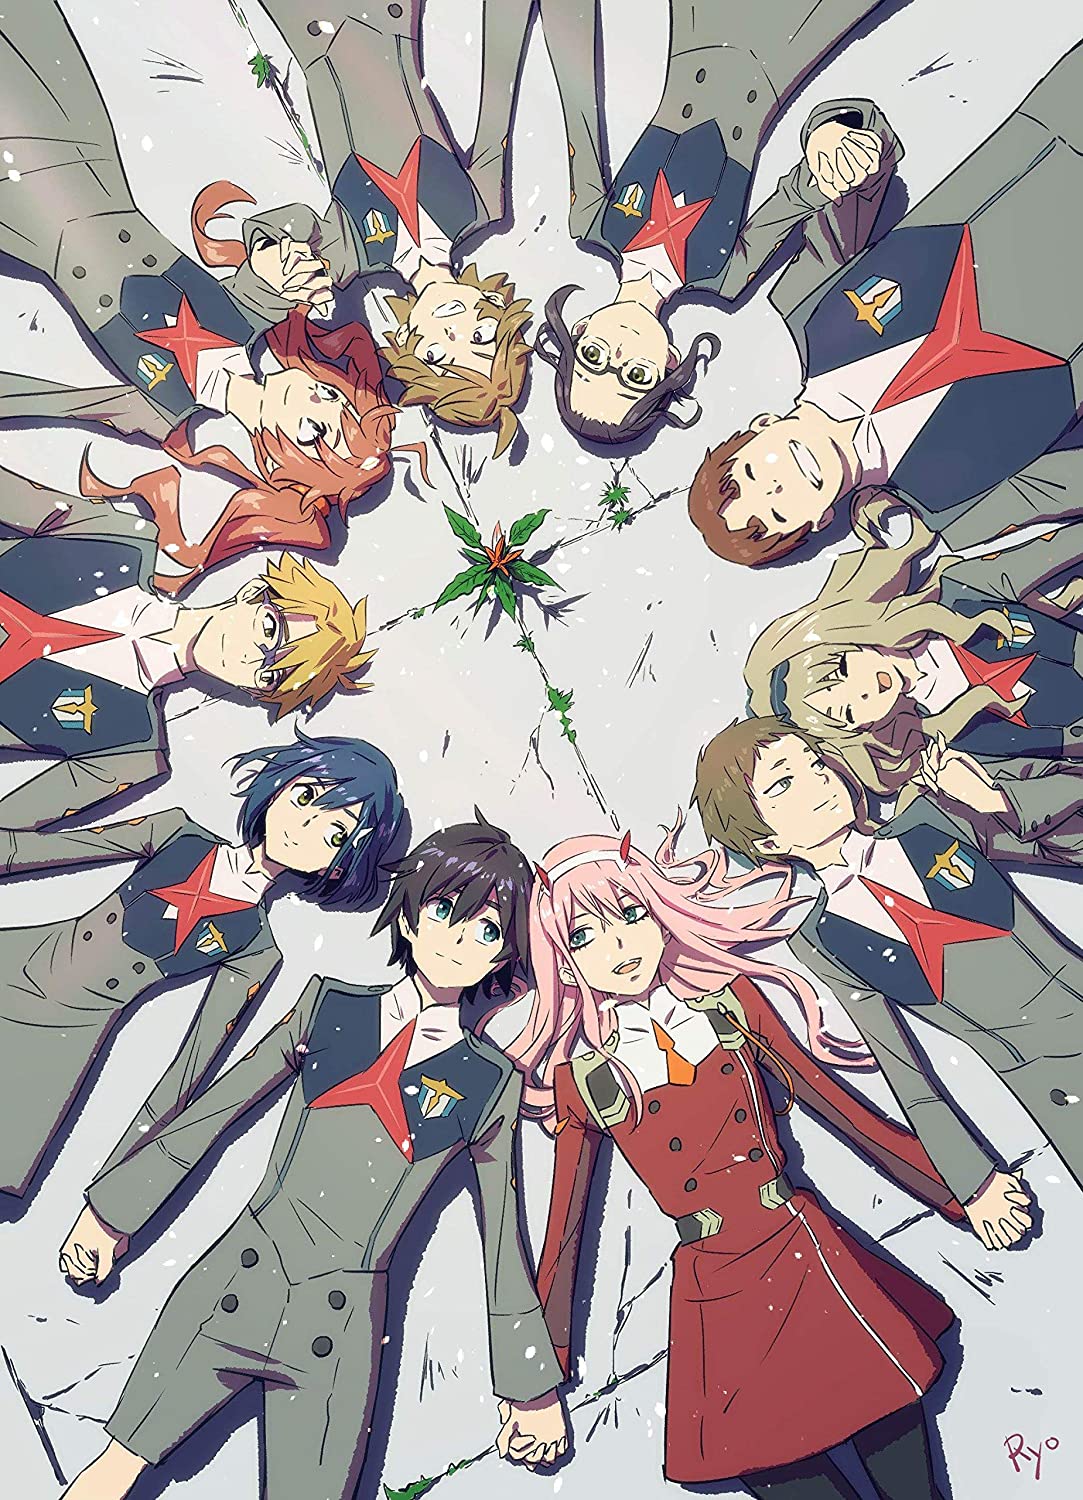 Anime Darling in the Franxx Poster Wall Print Wall Decor Wallpaper Darling in the Franxx Home Decor Gift for Her Gift for Him: Handmade